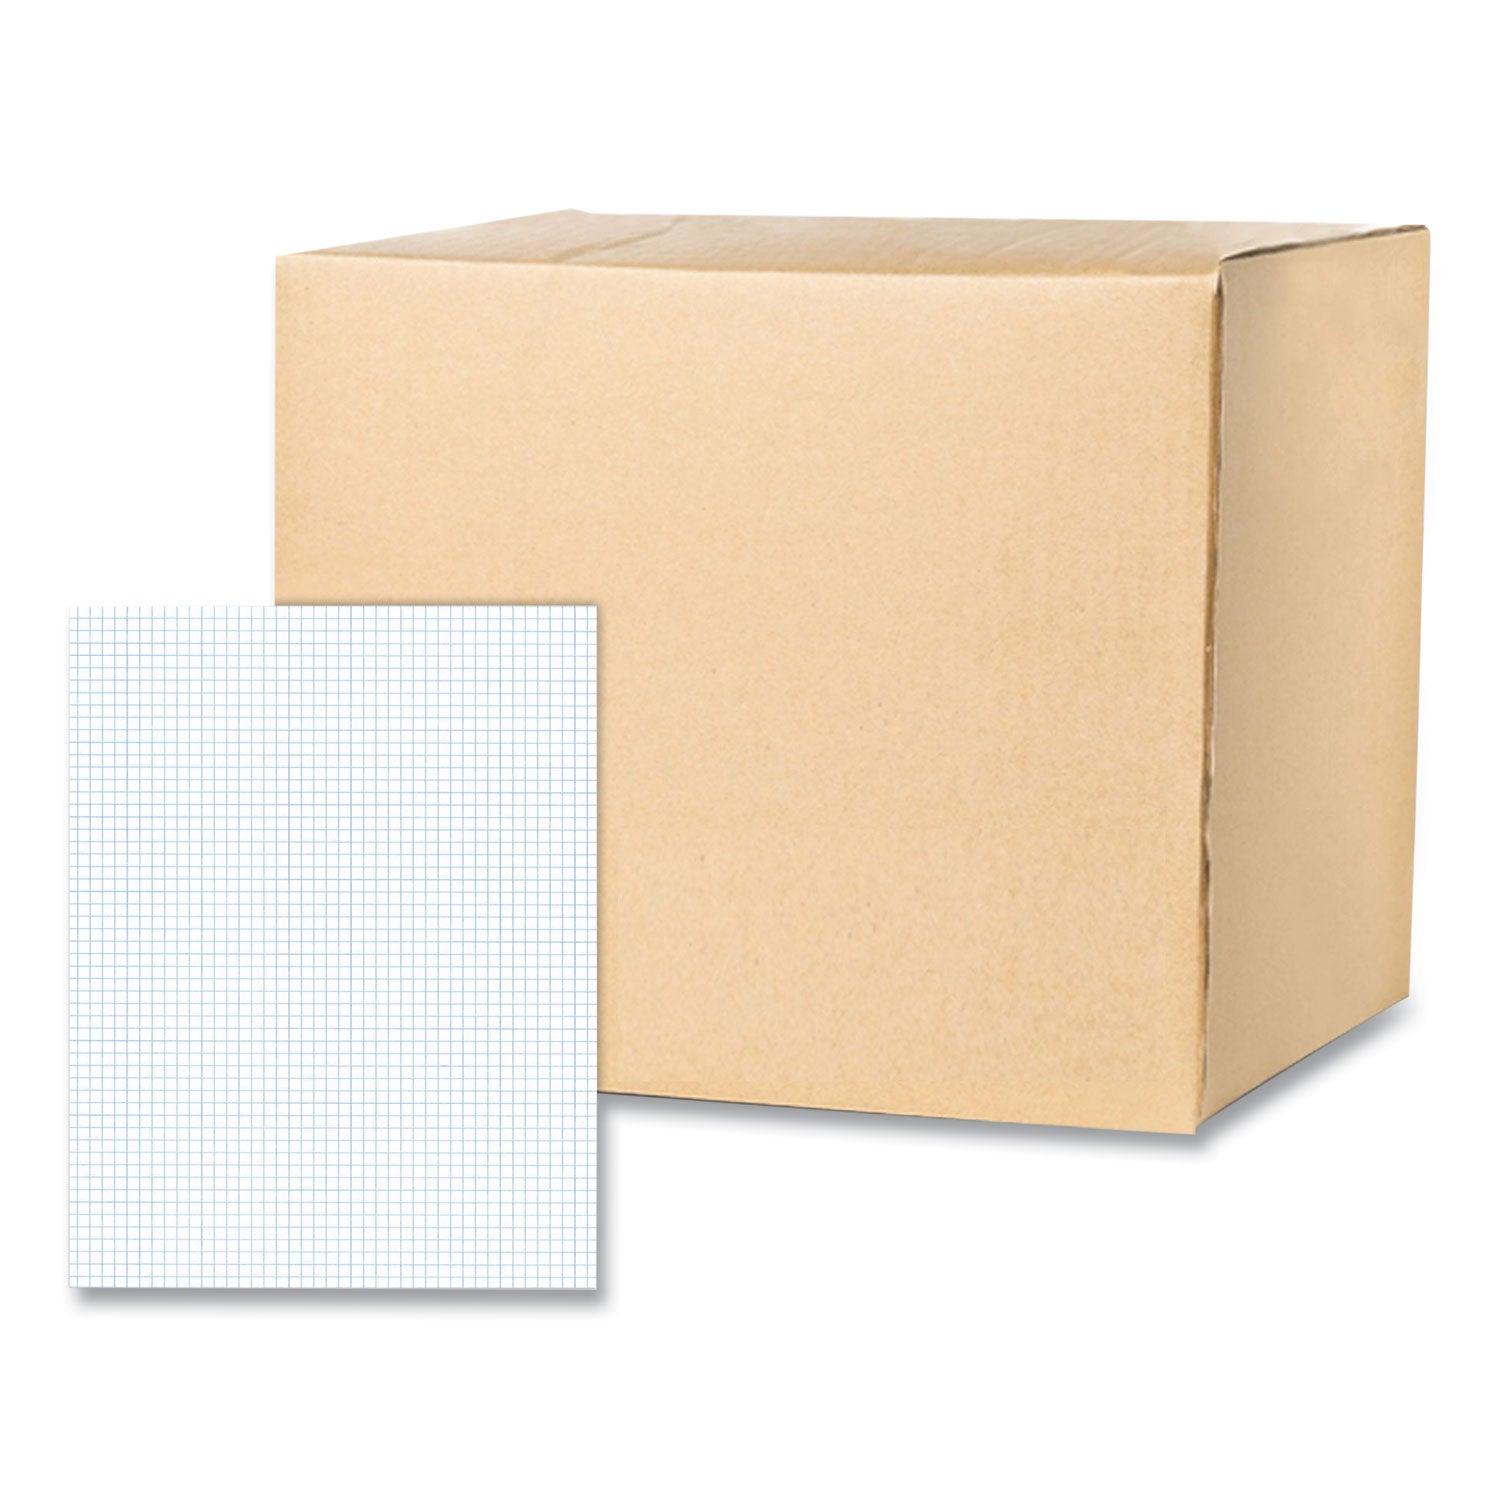 gummed-pad-5-sq-in-quadrille-rule-50-white-85-x-11-sheets-72-carton-ships-in-4-6-business-days_roa95161cs - 1